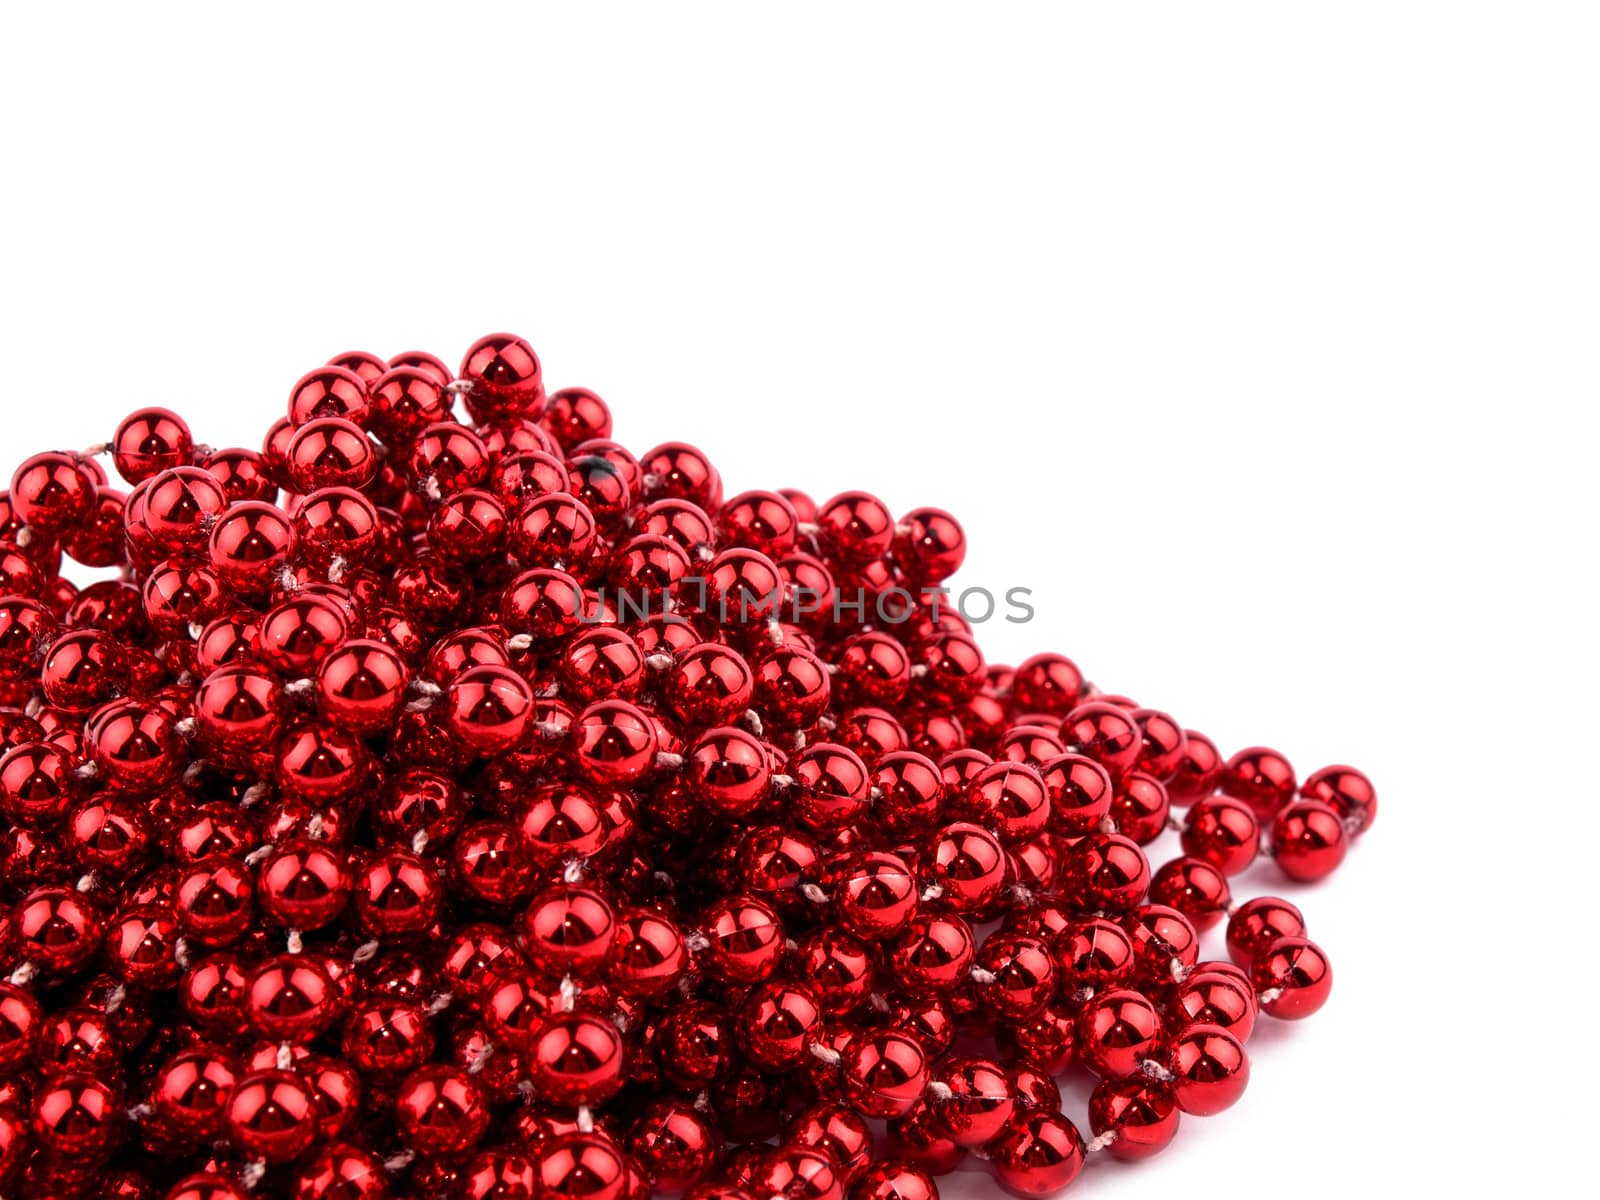 Christmas garland made from small red beads, on white background.